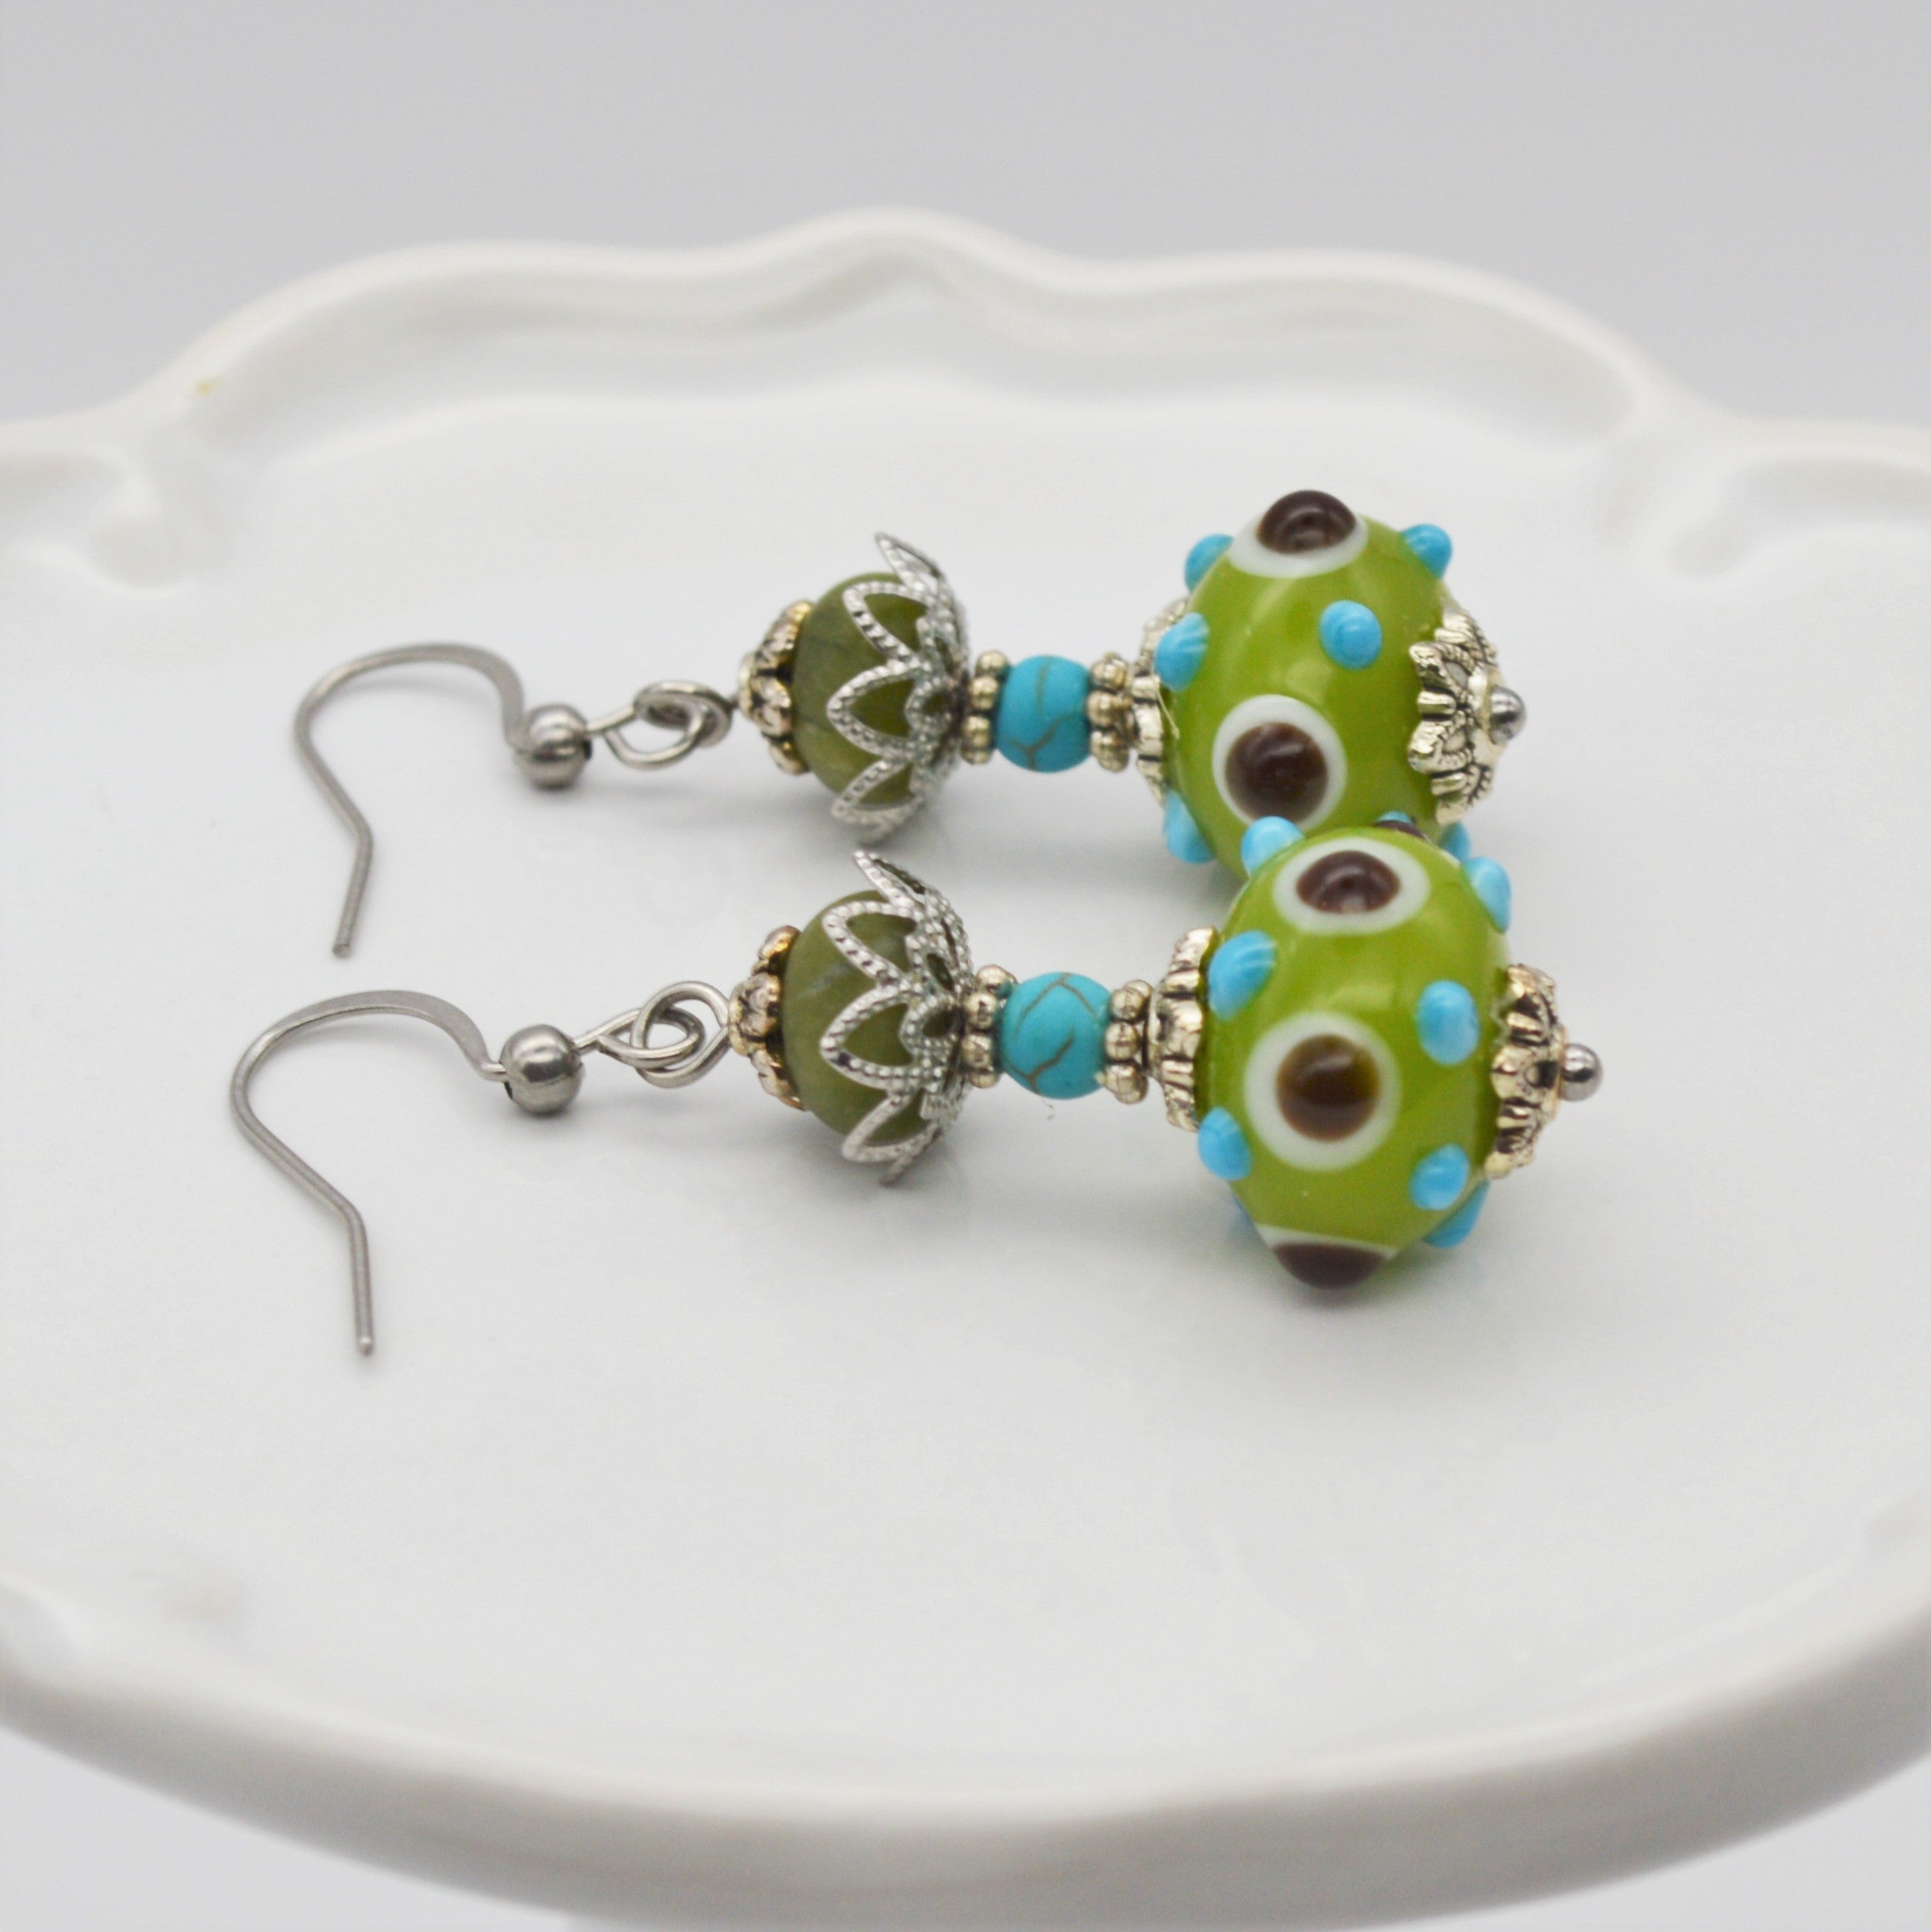 Buy Murano Glass Earrings Online In India  Etsy India